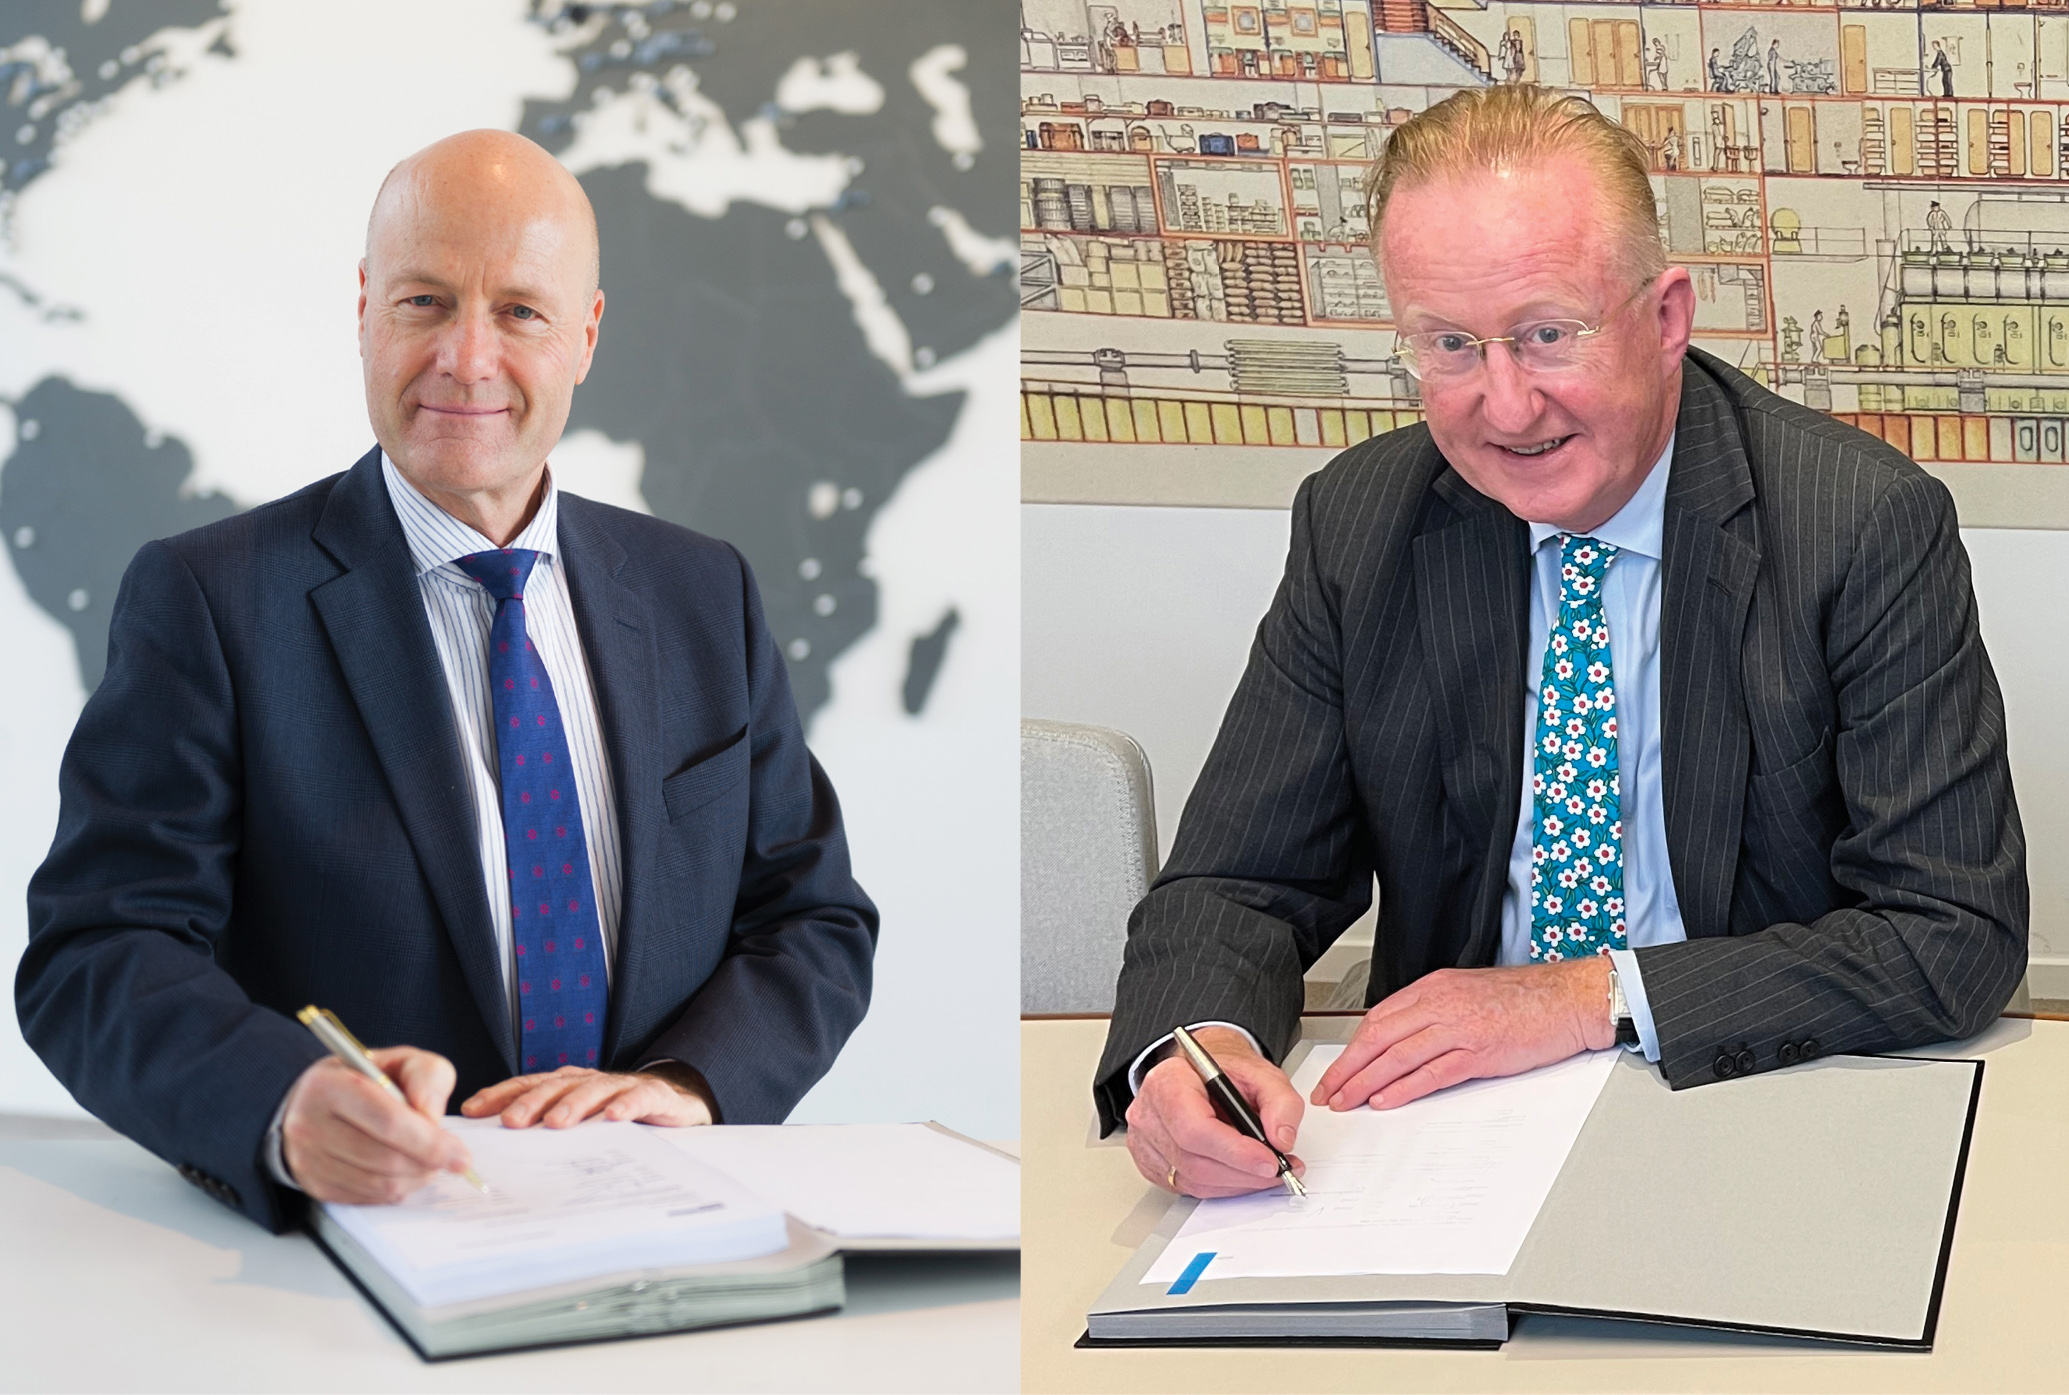 Knut Müller, Vice President Global Governmental at Rolls-Royce business unit Power Systems (left), and Hein van Ameijden, Managing Director of Damen Naval, signed the contract for the automation solutions for the four new F126 frigates for the German Navy. Due to the COVID-19 pandemic they were physically separated from each other.